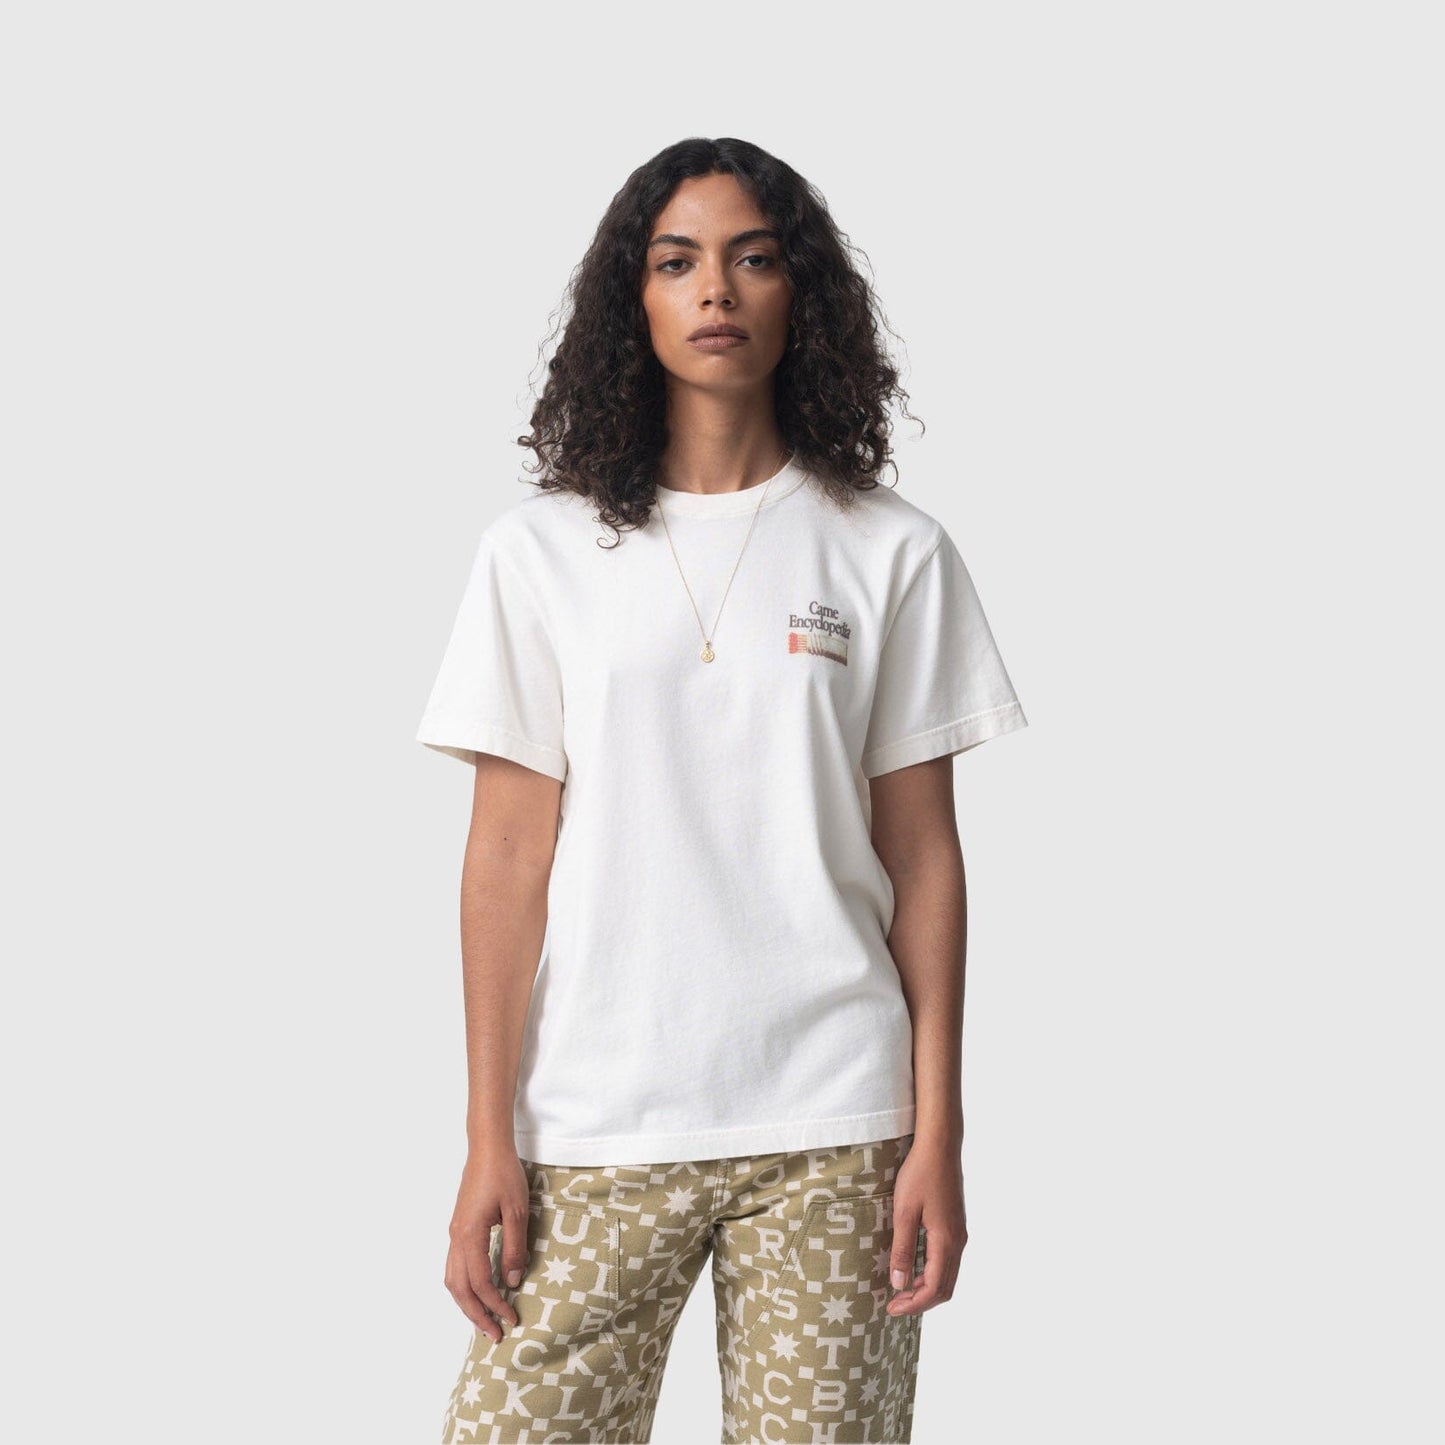 Carne Bollente The Bare Necessities T-Shirt - Cream T-shirt Carne Bollente 